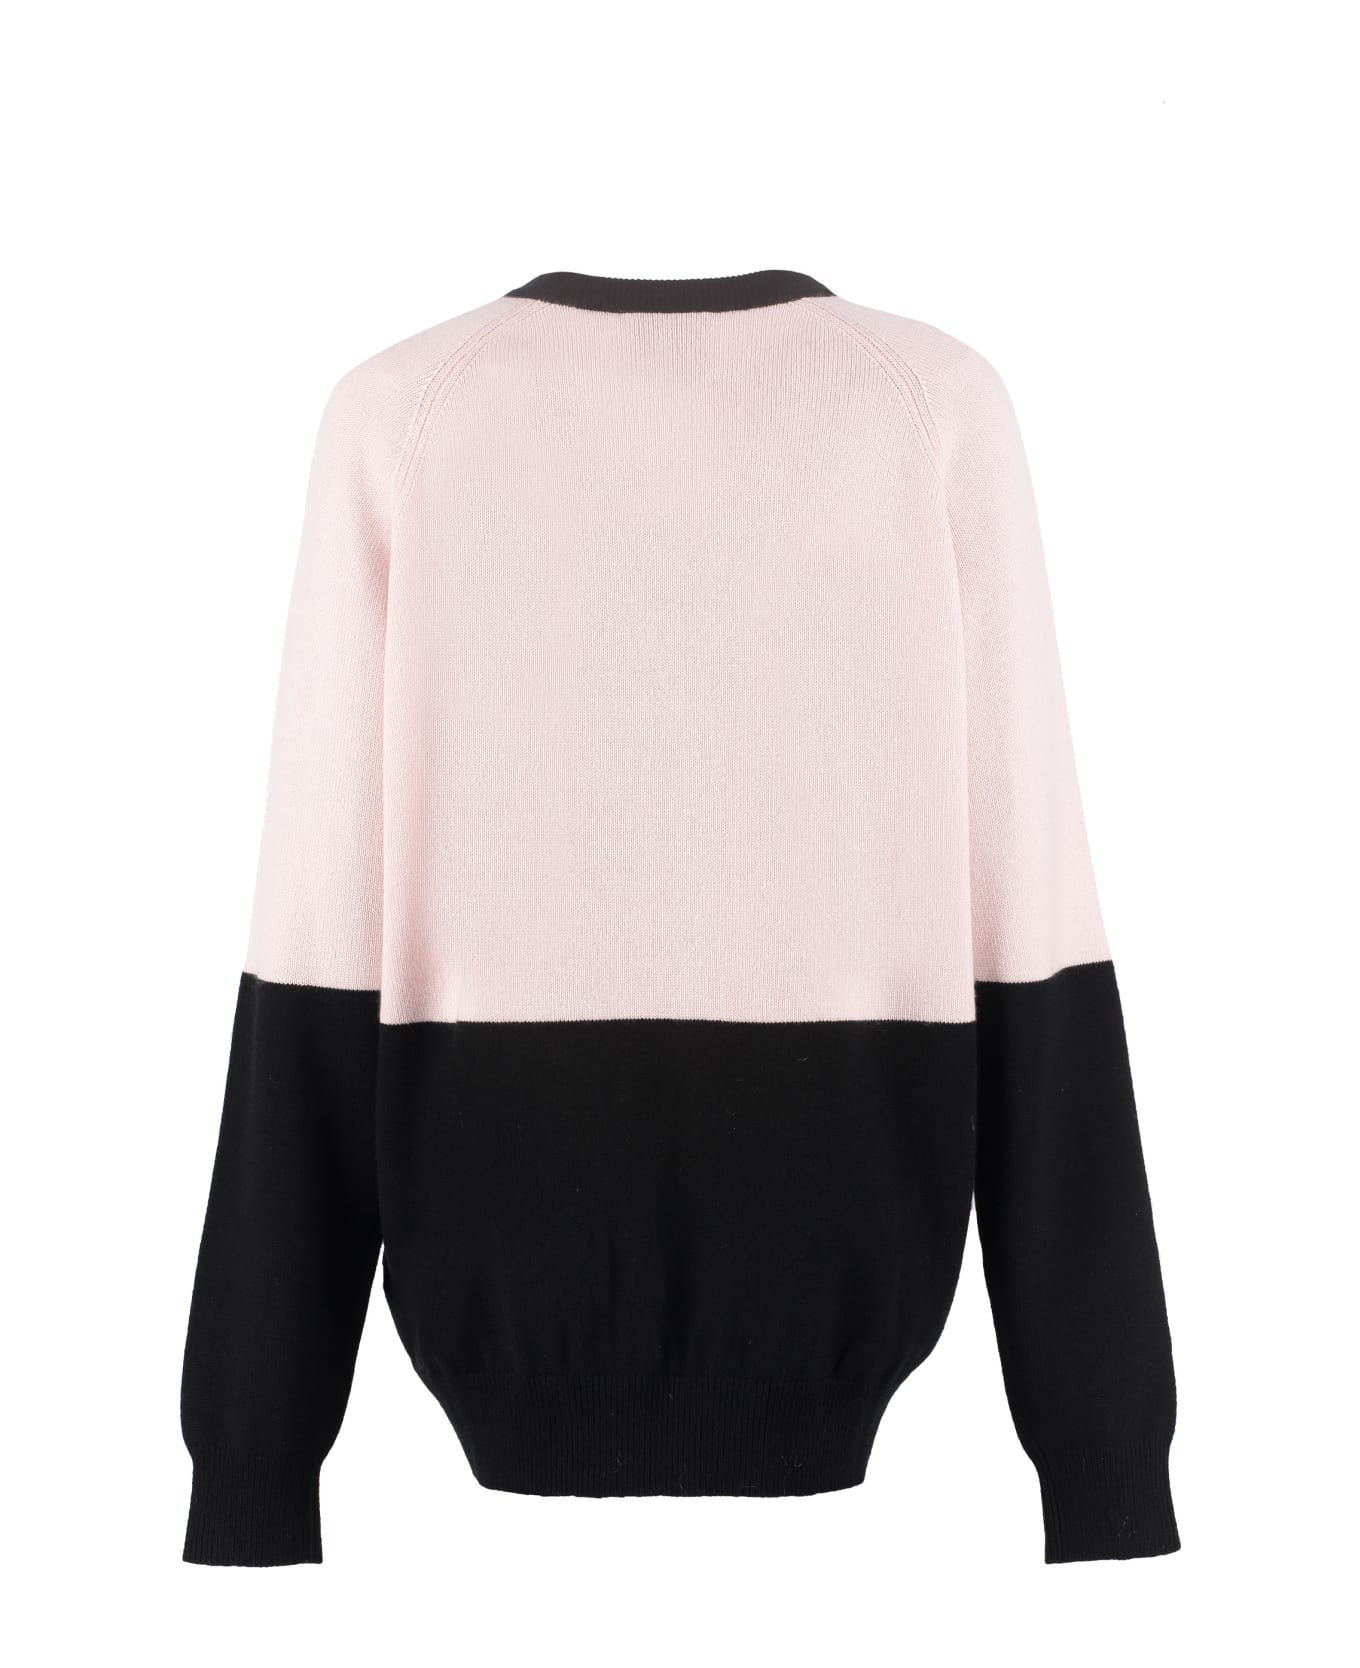 Givenchy Logo Intarsia Cashmere Sweater - Pink